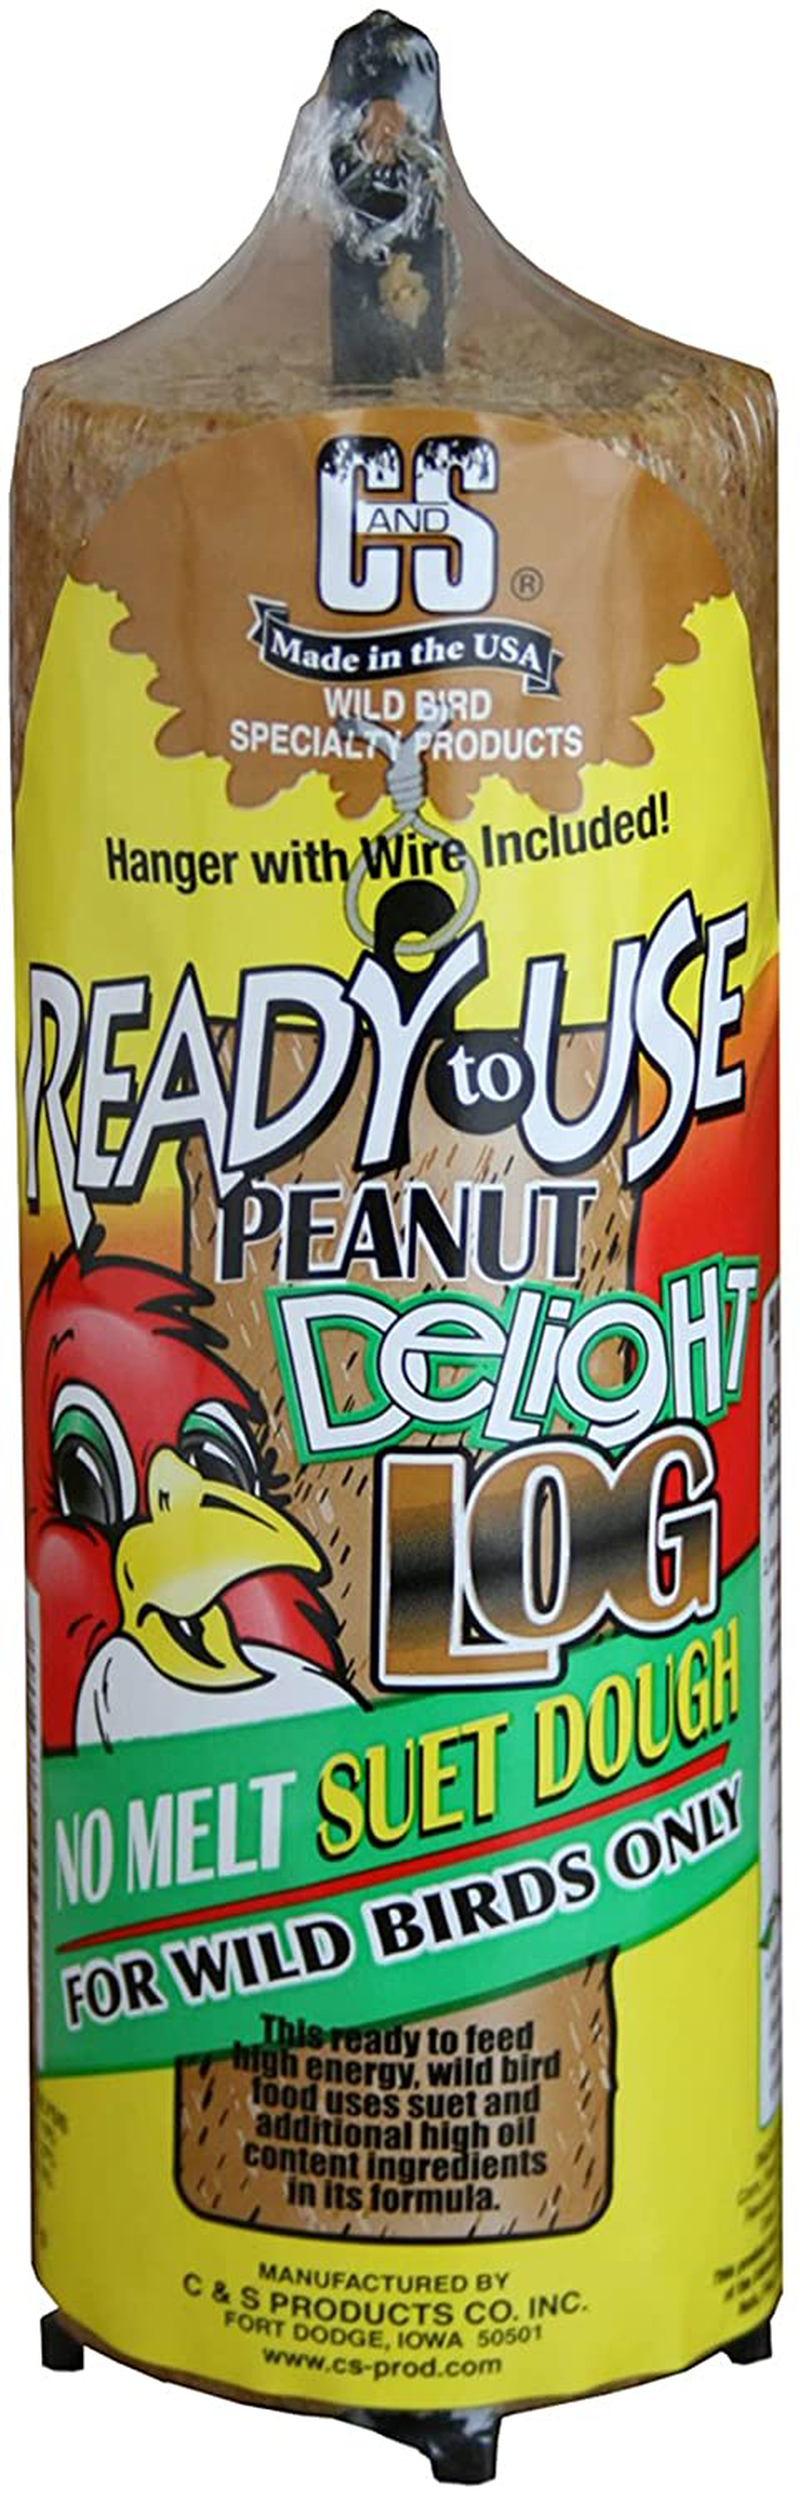 C&S Ready to Use Peanut Delight Log 2 Pound, 8 Pack